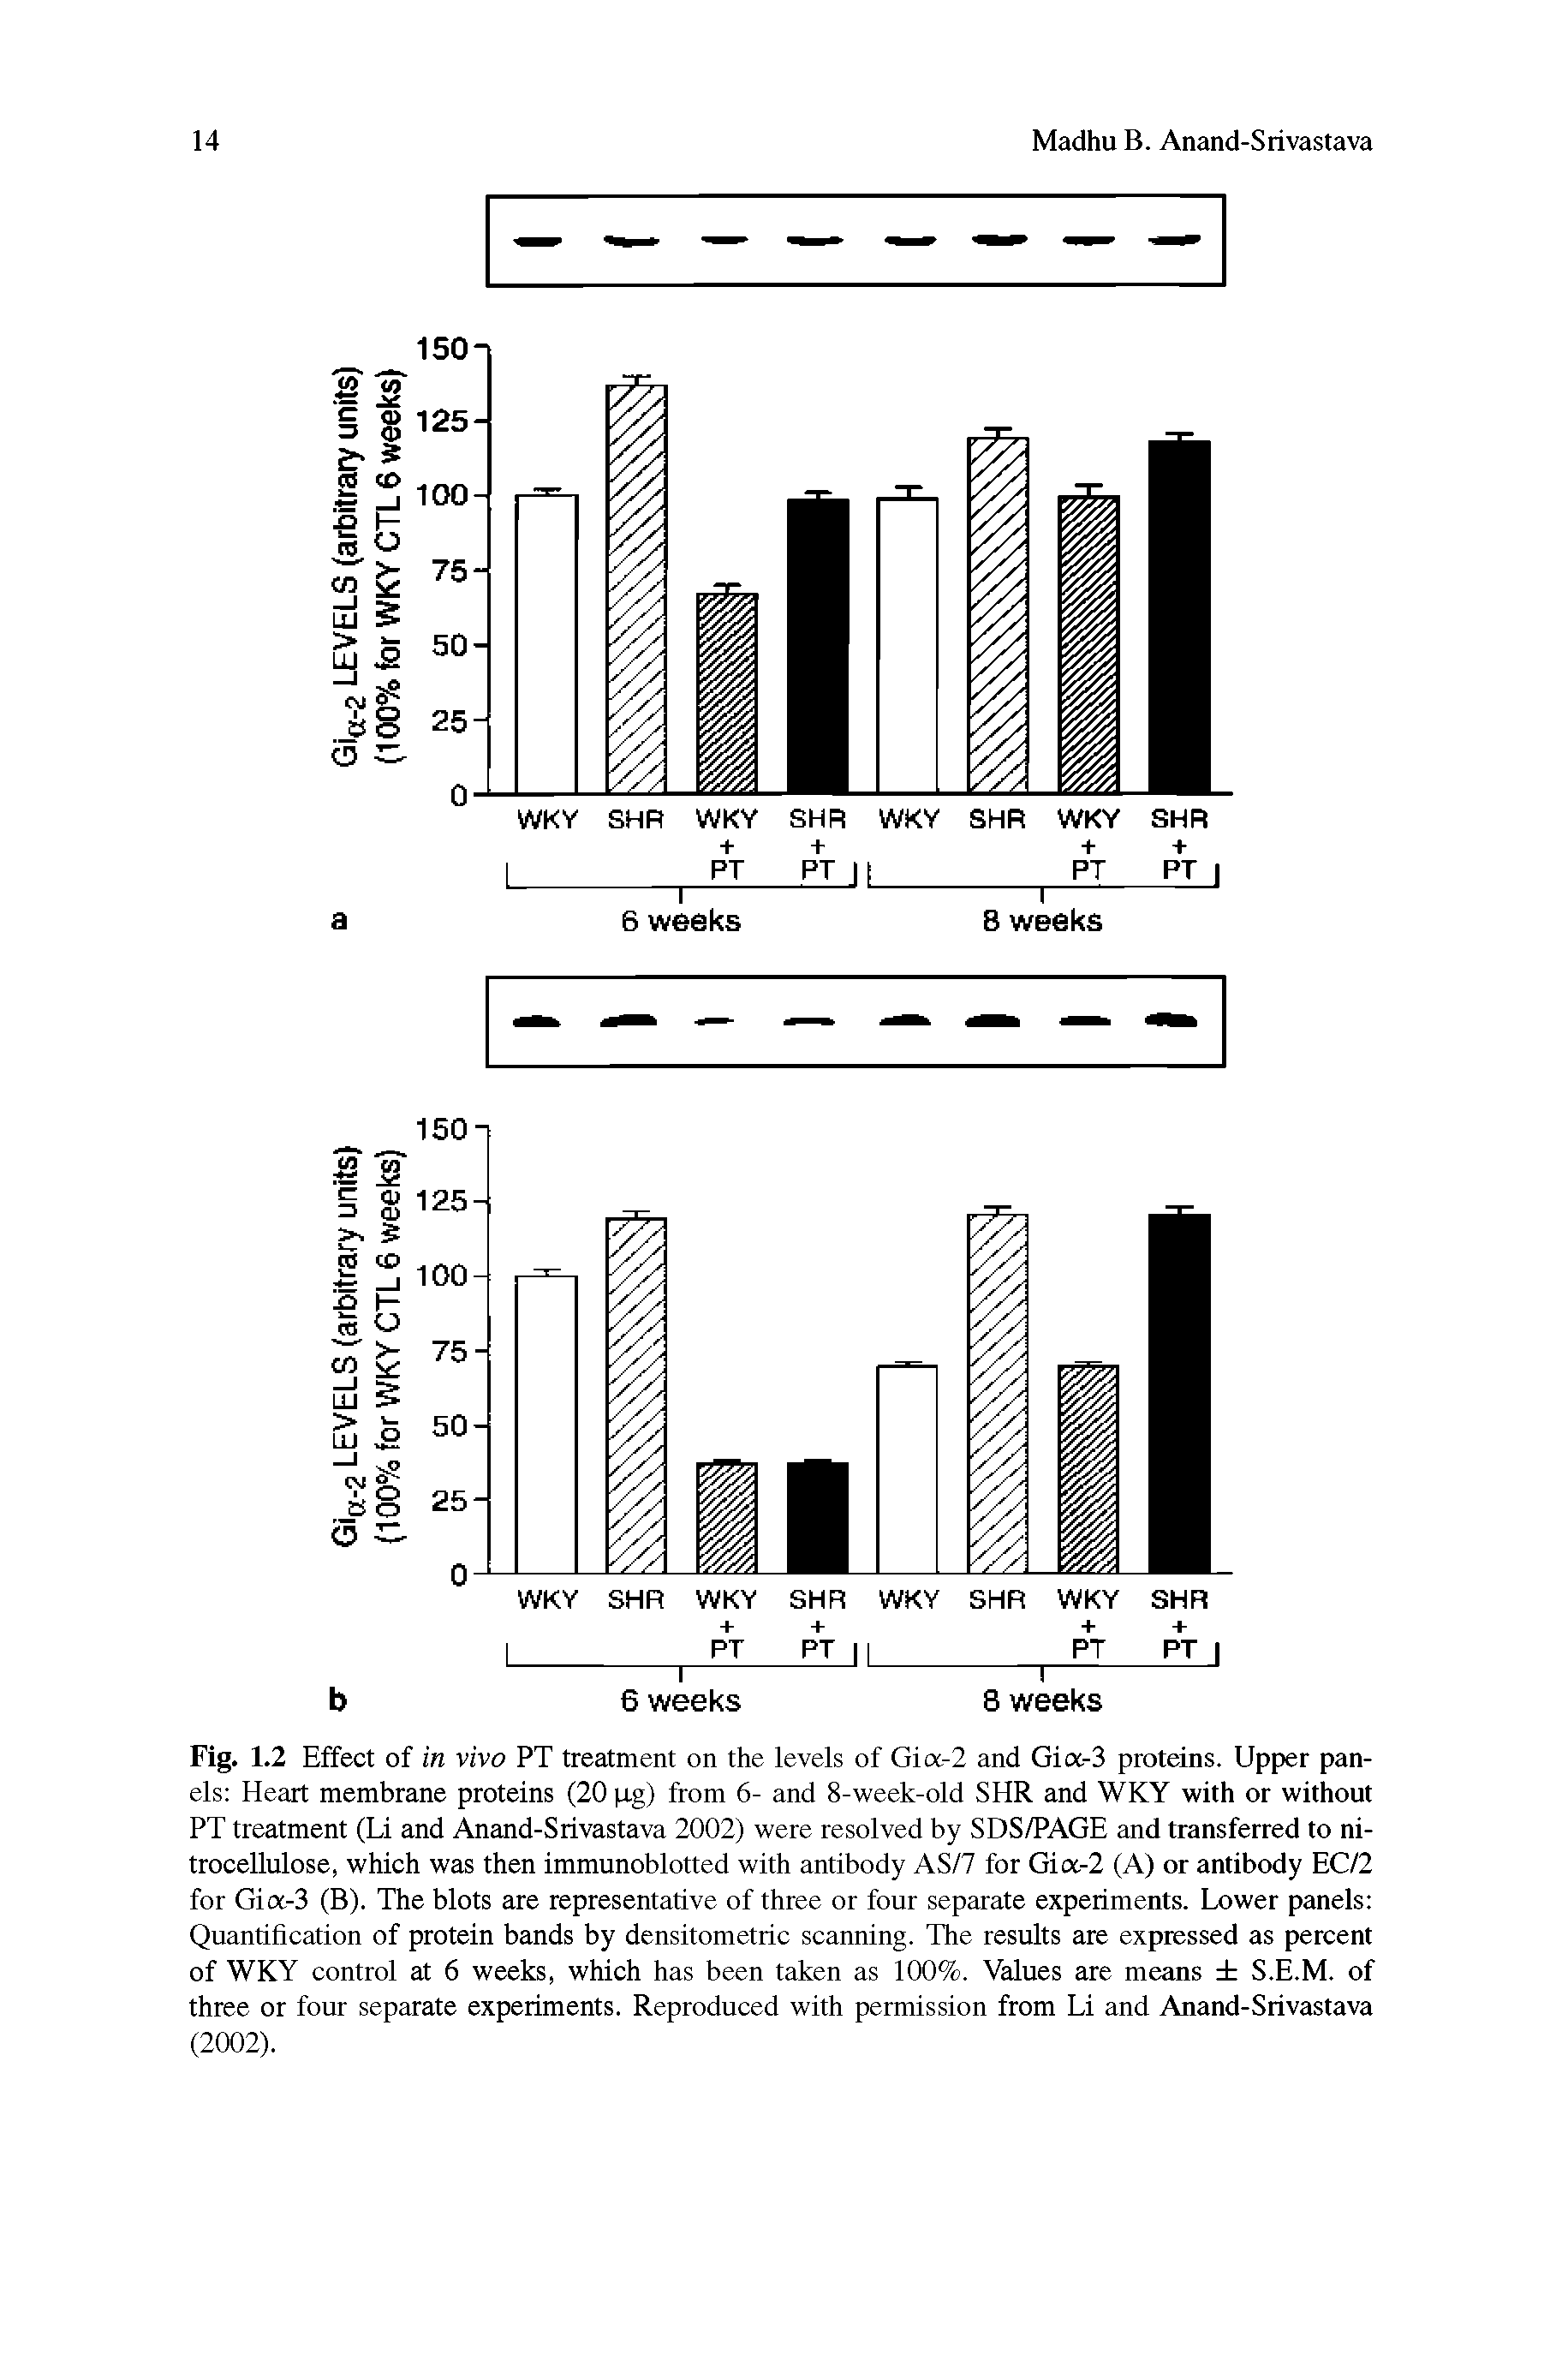 Fig. 1.2 Effect of in vivo PT treatment on the levels of Gia-2 and Gioc.-3 proteins. Upper panels Heart membrane proteins (20 pg) from 6- and 8-week-old SHR and WKY with or without PT treatment (Li and Anand-Srivastava 2002) were resolved by SDS/PAGE and transferred to nitrocellulose, which was then immunoblotted with antibody AS/7 for Gia-2 (A) or antibody EC/2 for Gia-3 (B). The blots are representative of three or four separate experiments. Lower panels Quantification of protein bands by densitometric scanning. The results are expressed as percent of WKY control at 6 weeks, which has been taken as 100%. Values are means S.E.M. of three or four separate experiments. Reproduced with permission from Li and Anand-Srivastava (2002).